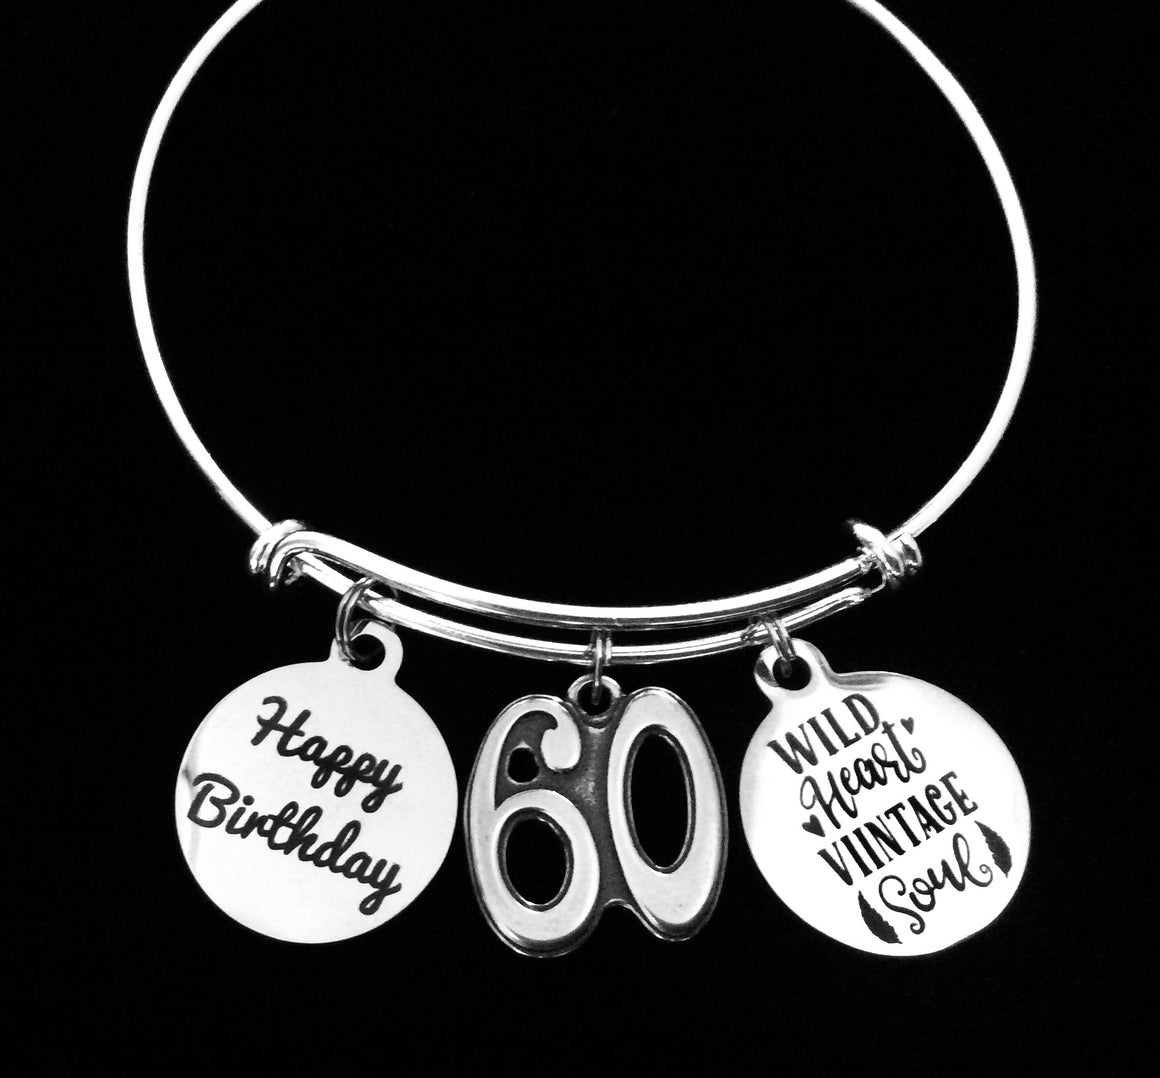 Happy 60th Birthday Gift for Women Expandable Charm Bracelet Silver Adjustable One Size Fits All Wire Bangle